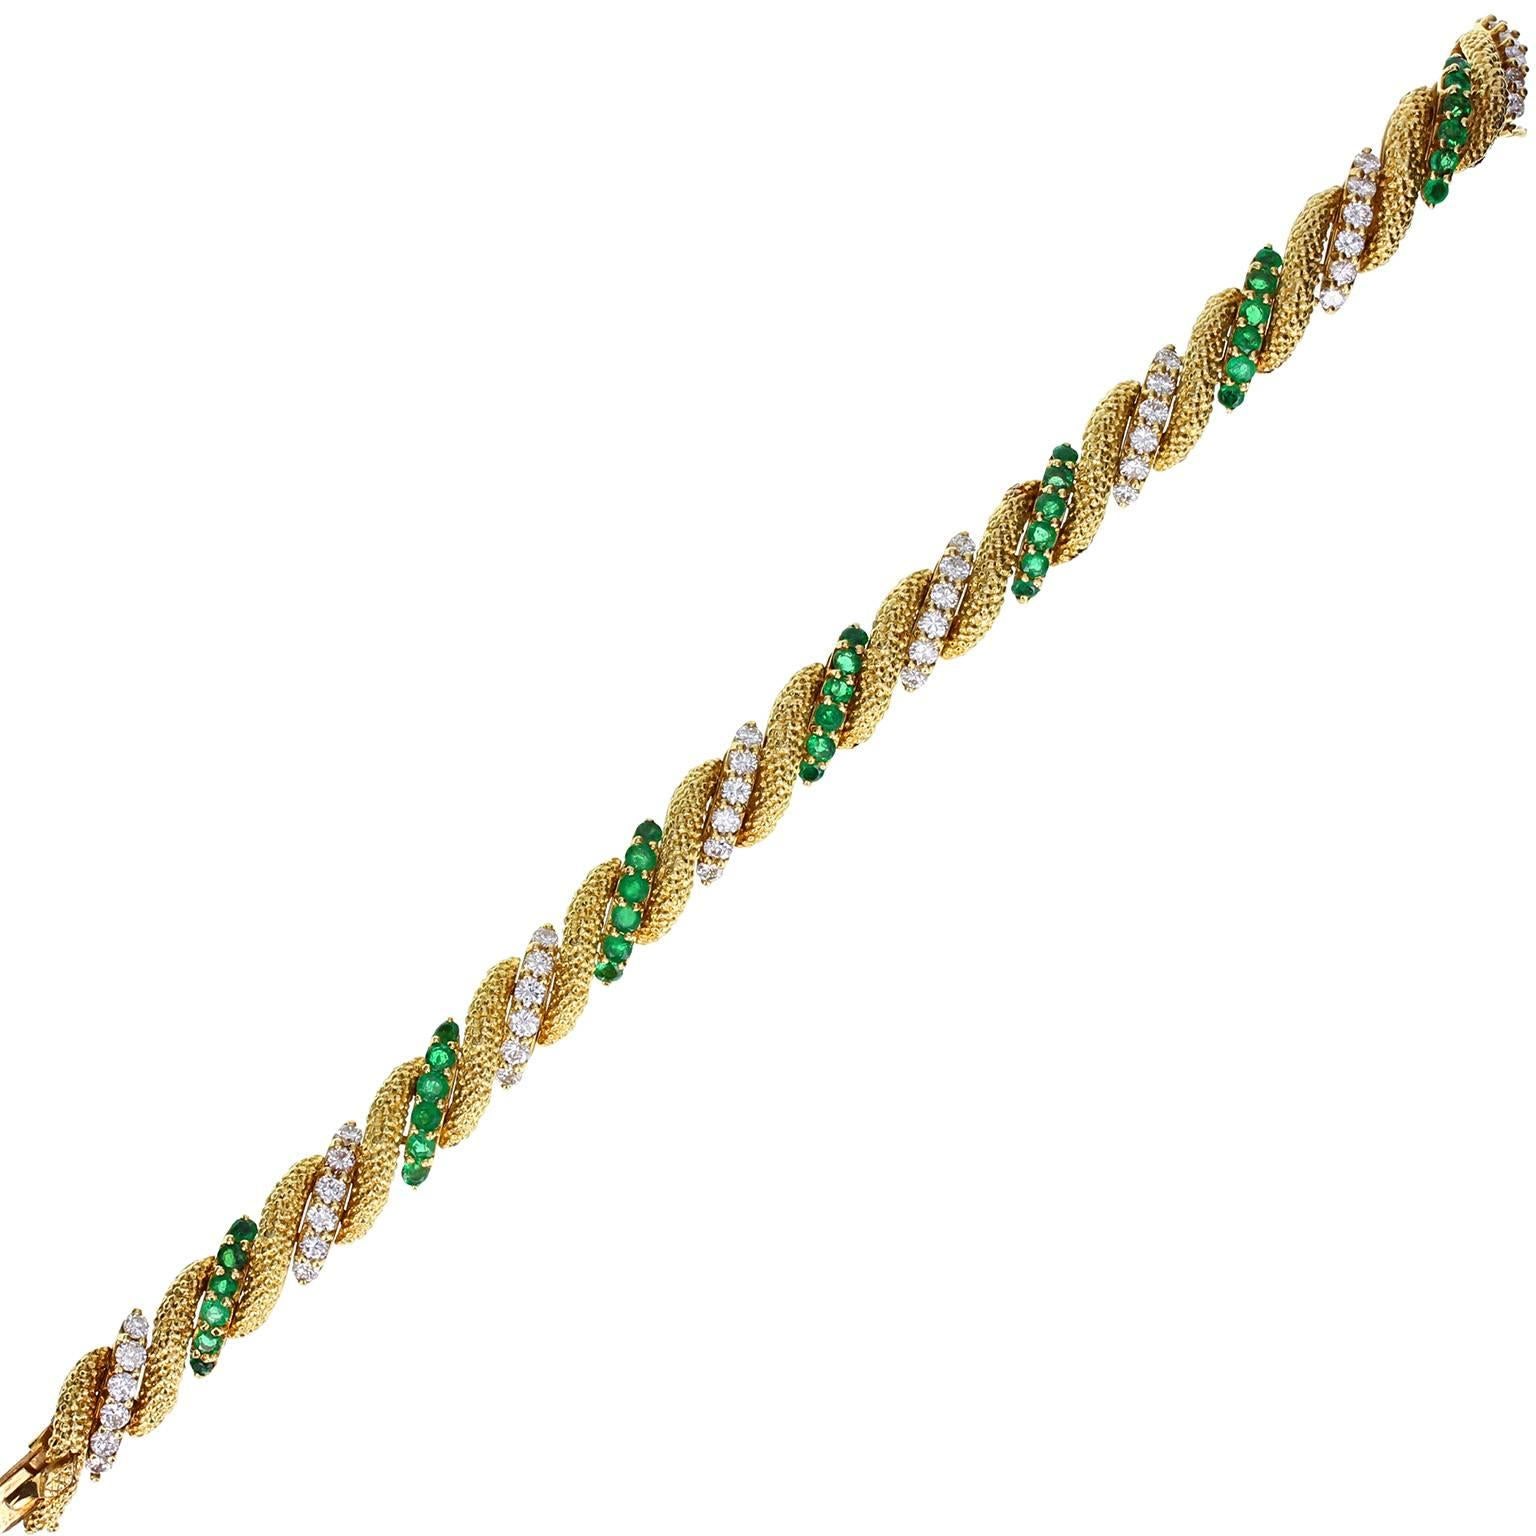 A fine quality bracelet by Van Cleef & Arpels. Circa 1960s. Comprising gold links with applied textured effect, alternating with links claw-set with brilliant-cut diamonds or emeralds. Gemstones all beautifully matched. Tongue type fastening with